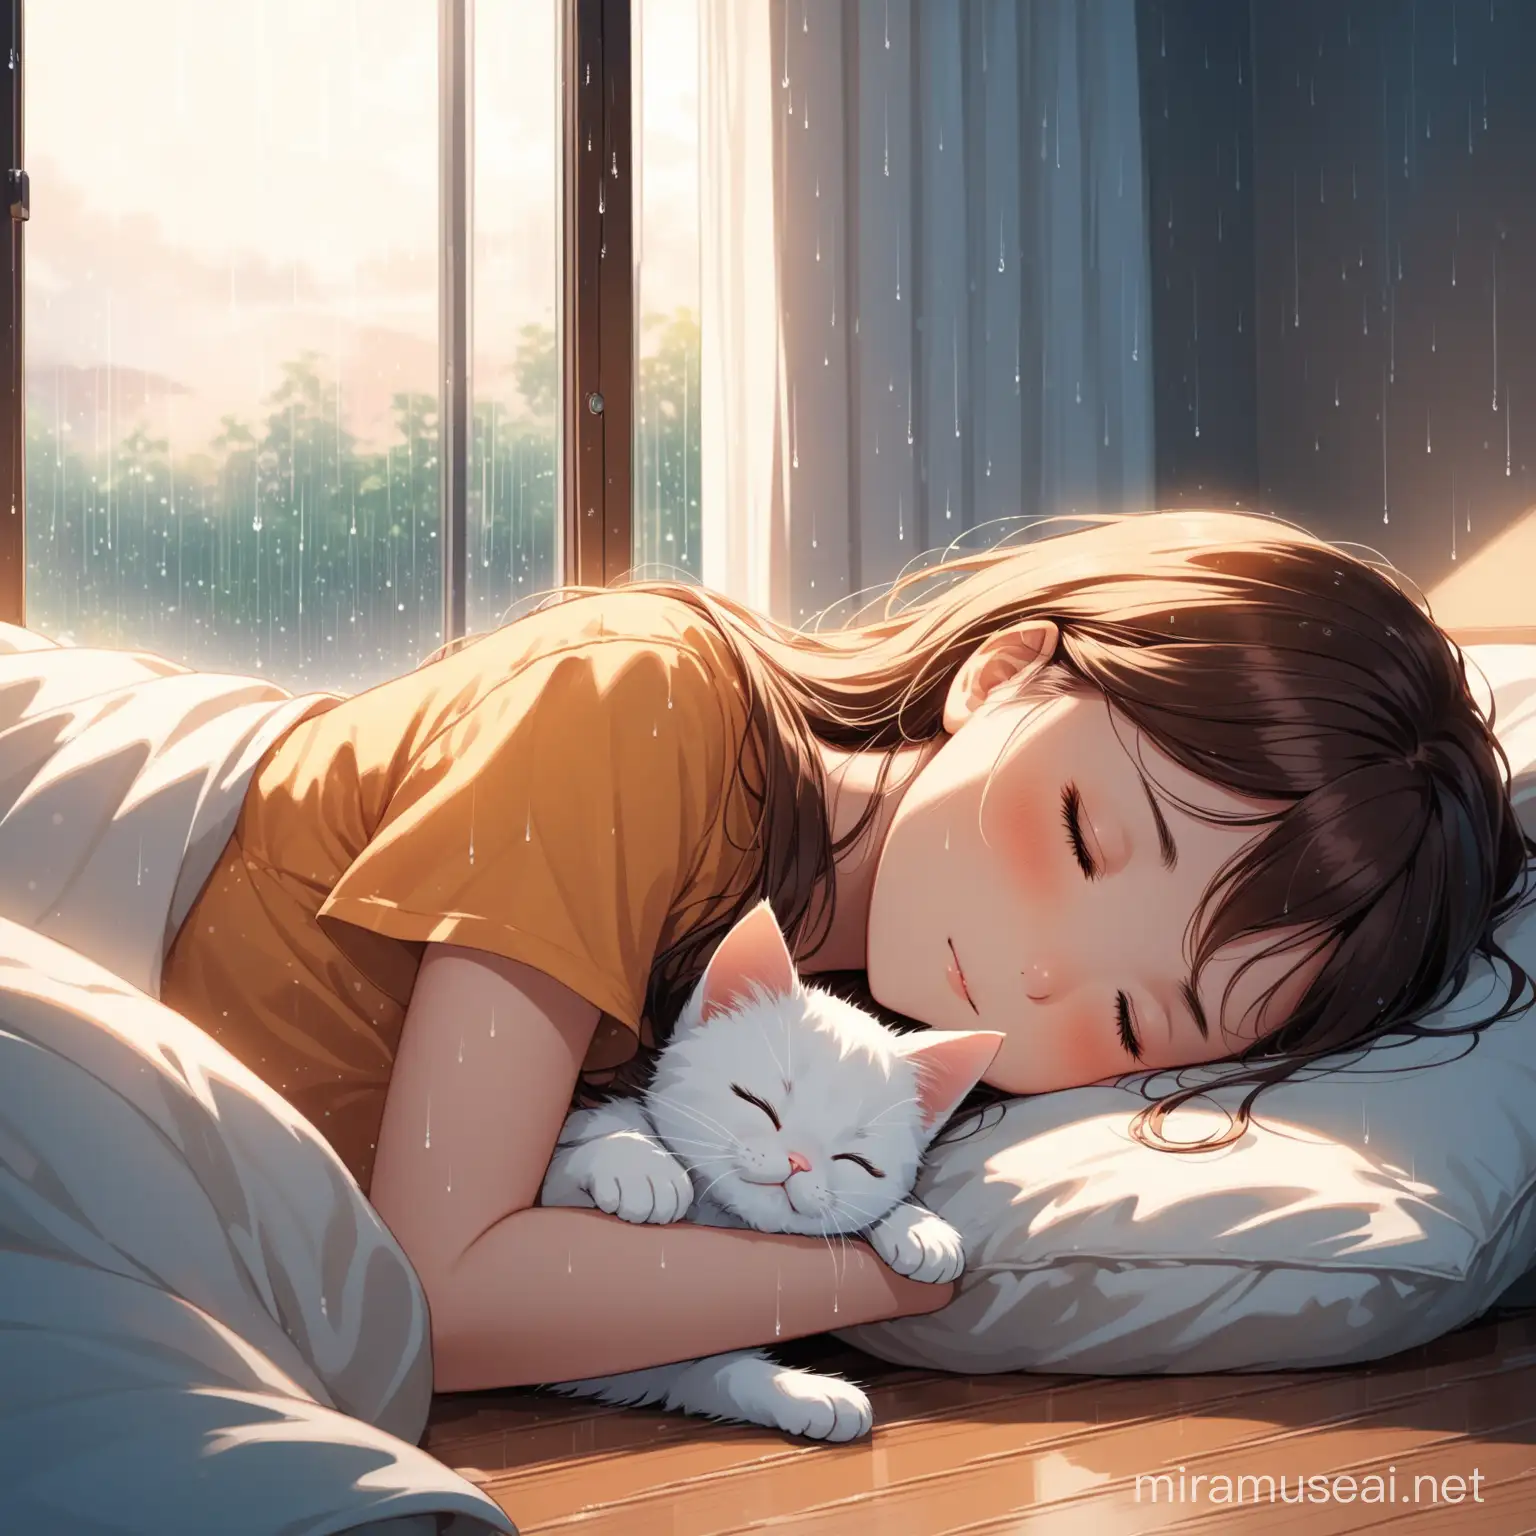 Tranquil Sleep Beautiful Girl and Kitten in Warm Room with Rain Outside